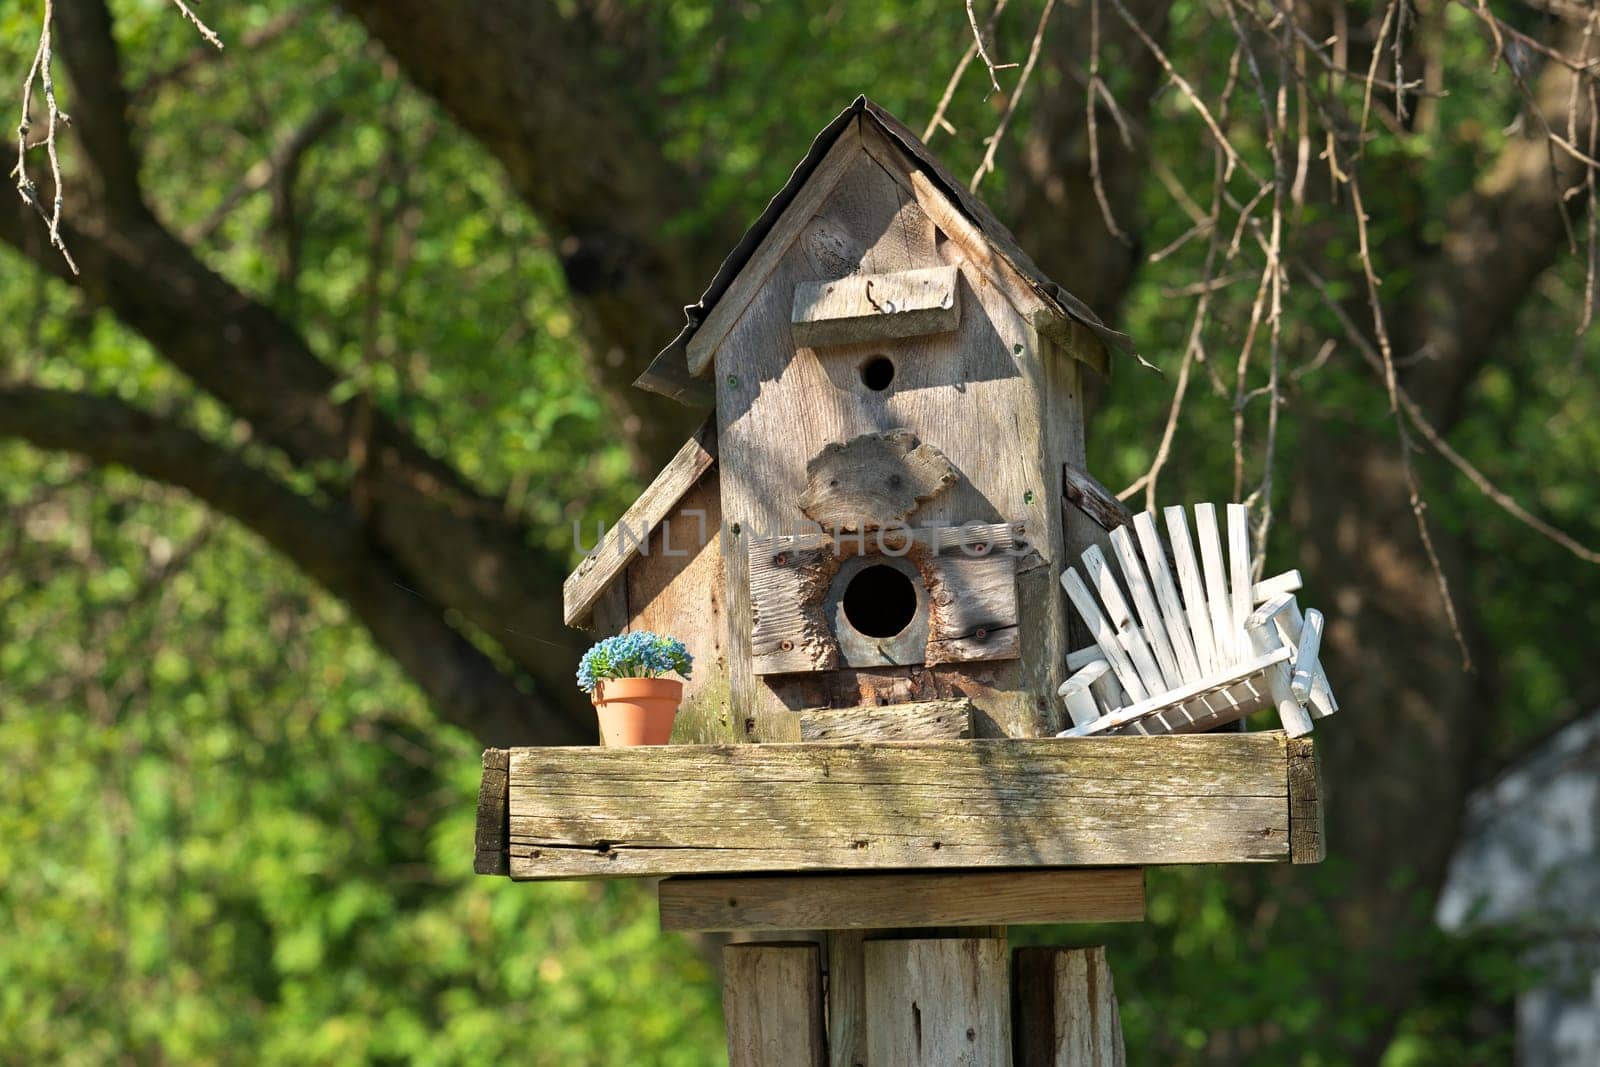 Whimsical Handmade Birdhouse in Garden with Miniature Chair and Potted Plant. High quality photo